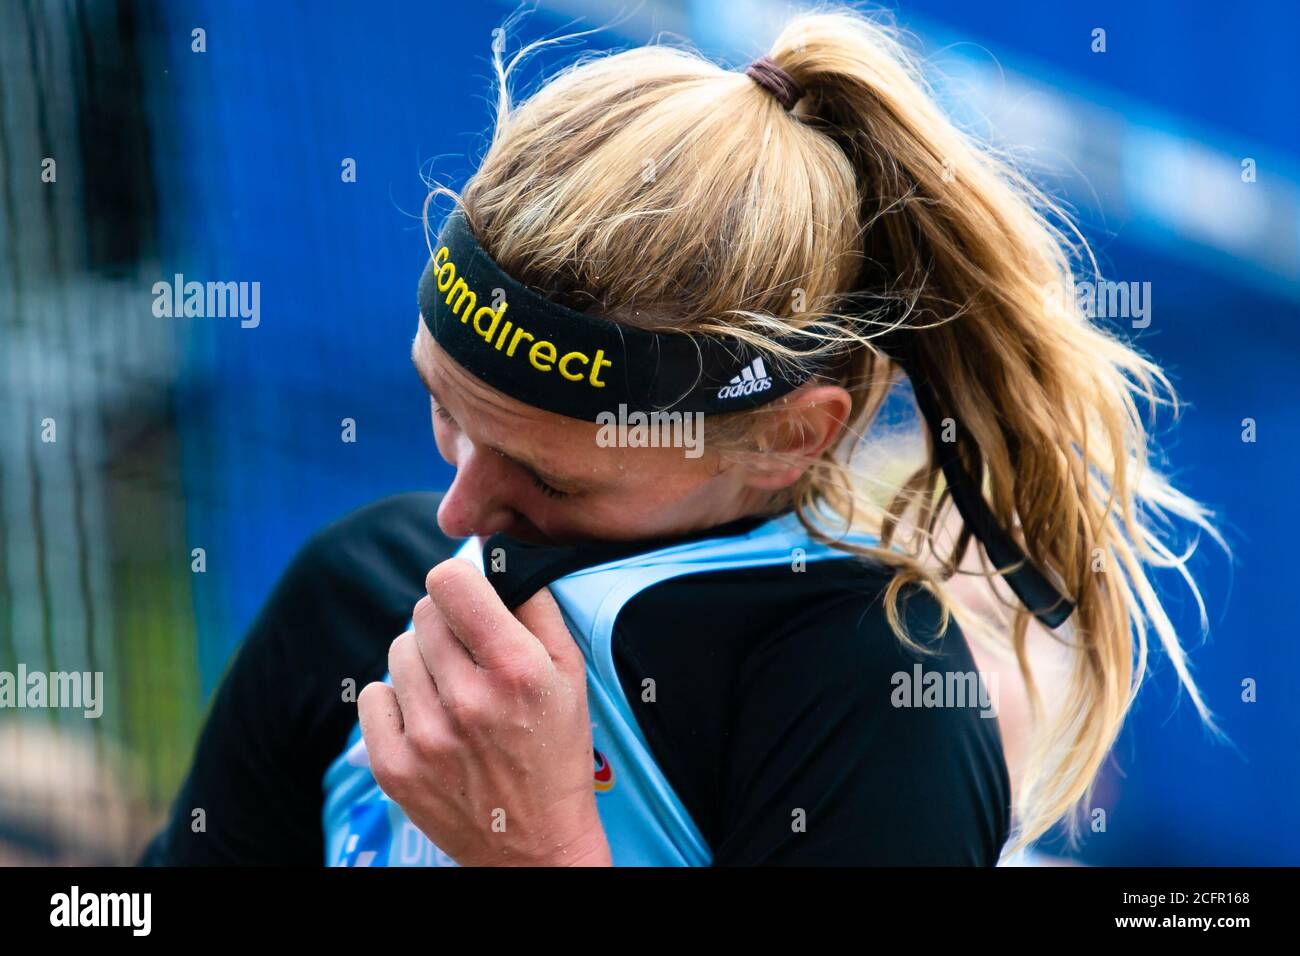 Timmendorfer Strand, Germany. 05th Sep, 2020. Magareta Kozuch (Hamburg) wipes sand out of her eyes in the final of the German Beach Volleyball Championships. Credit: Frank Molter/dpa/Alamy Live News Stock Photo